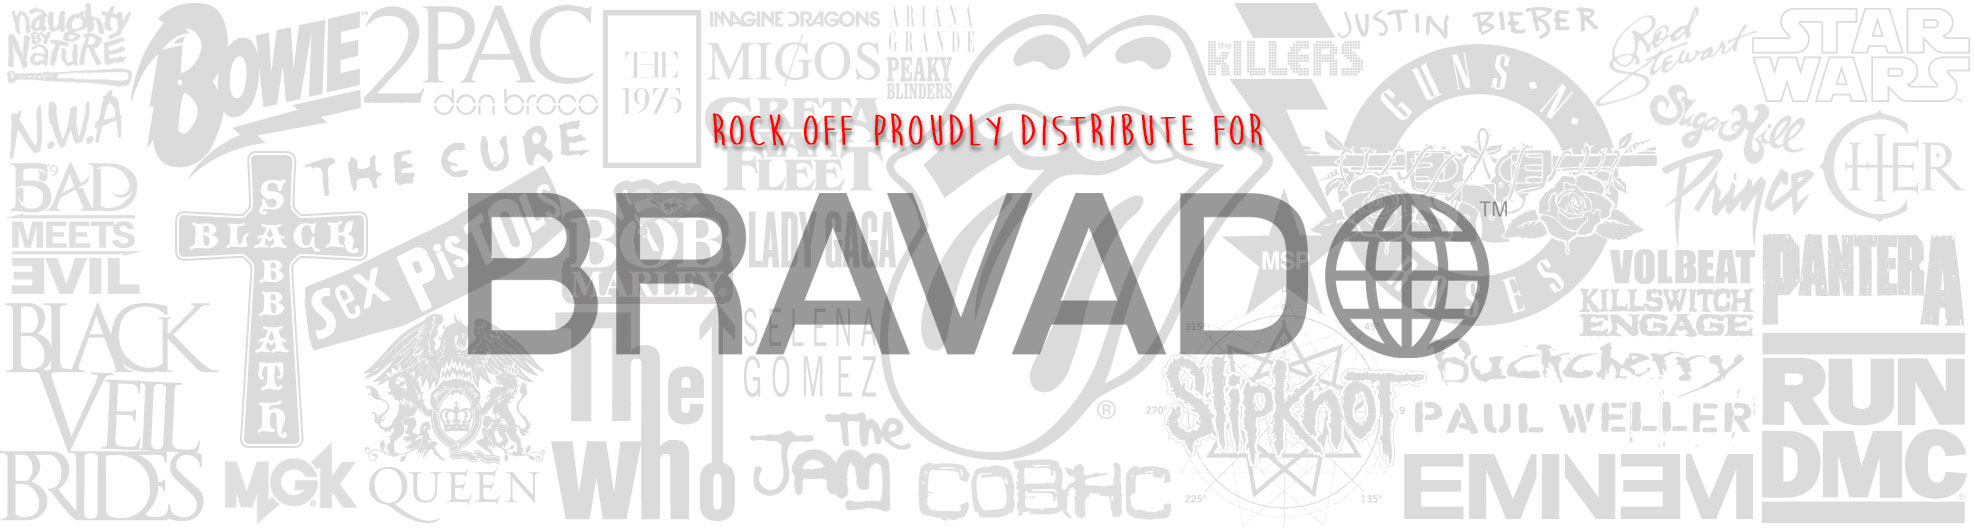 Bravado Official Merchandise available at Rock Off